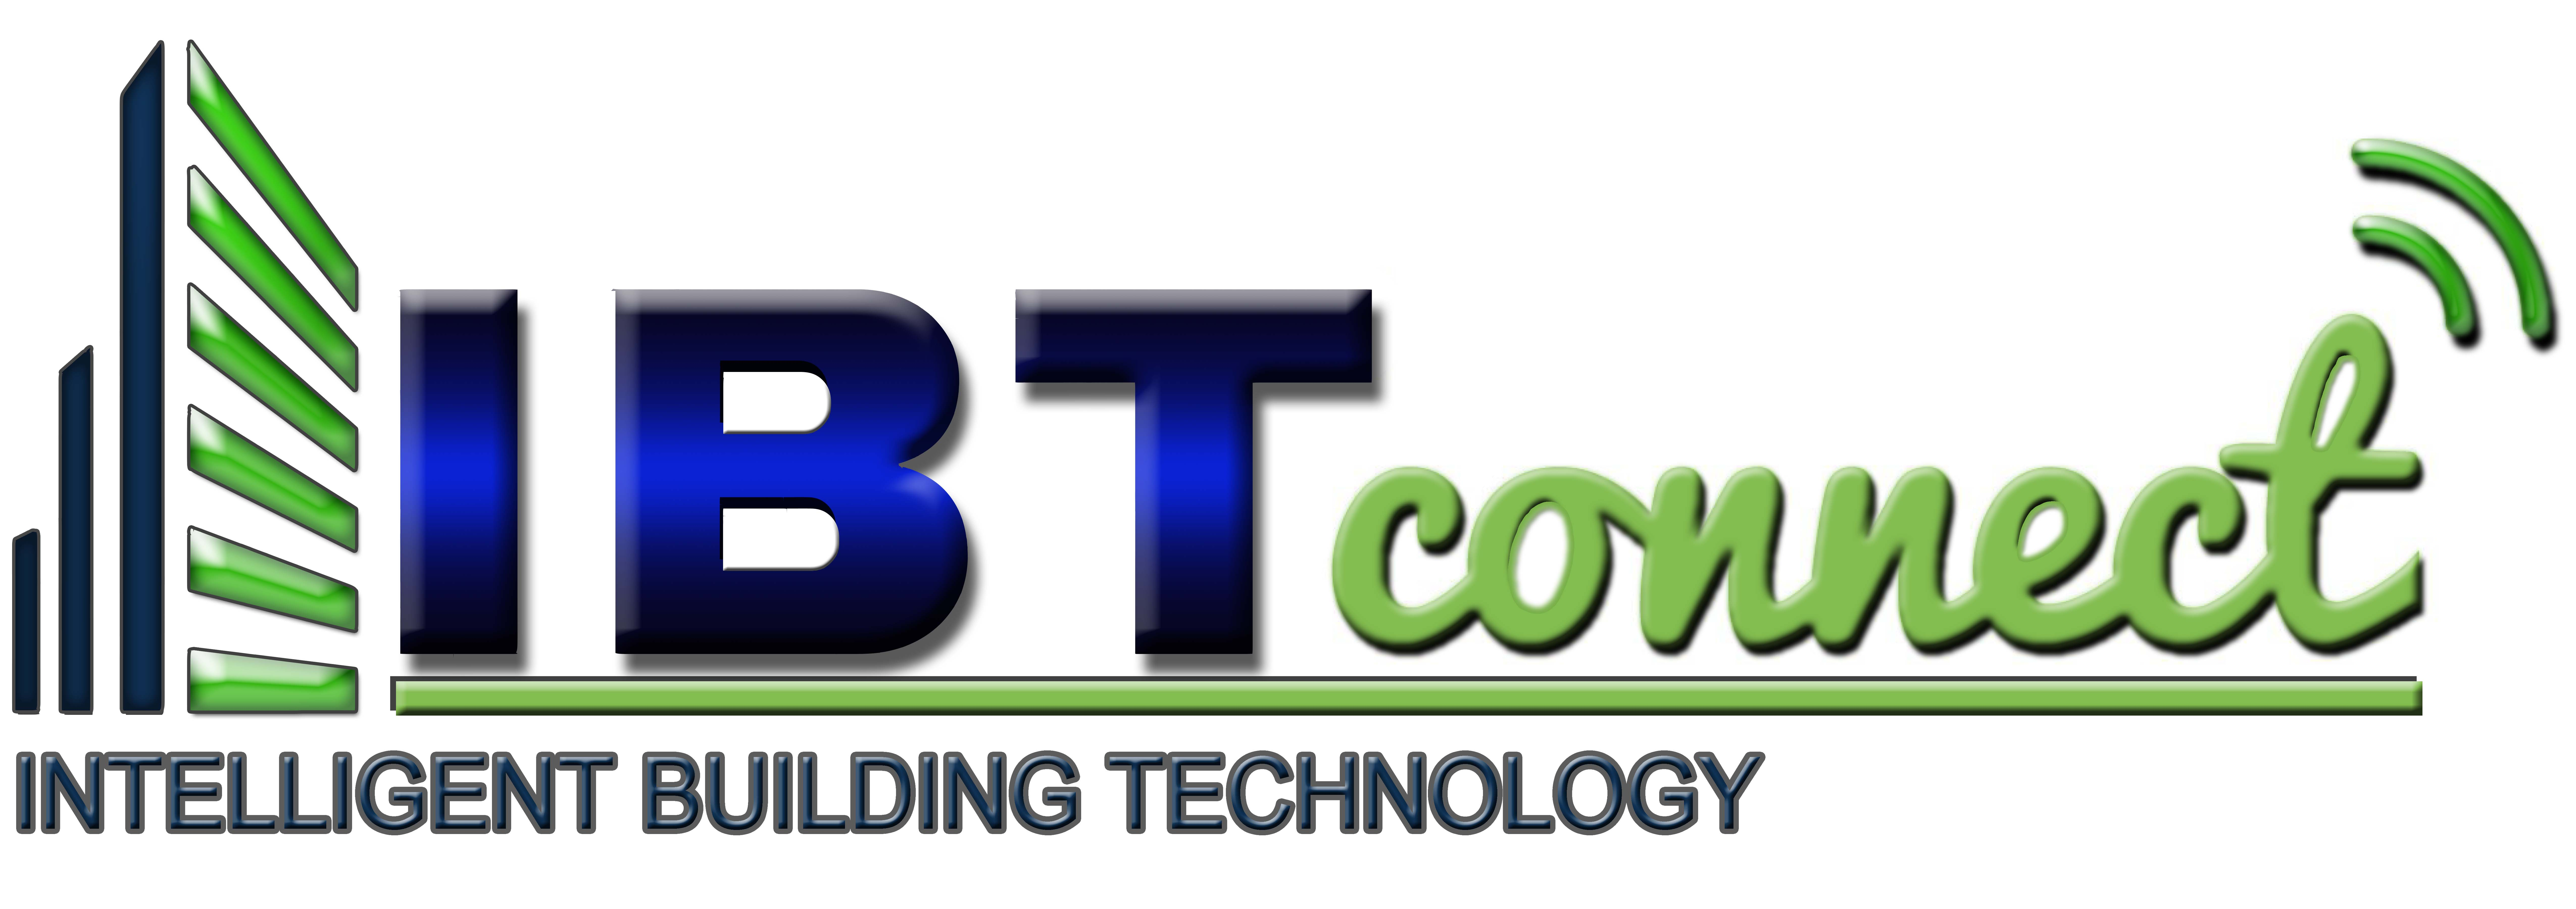 Building Technology Logo - Display Event TEXO Technology Conference, 5 4 17